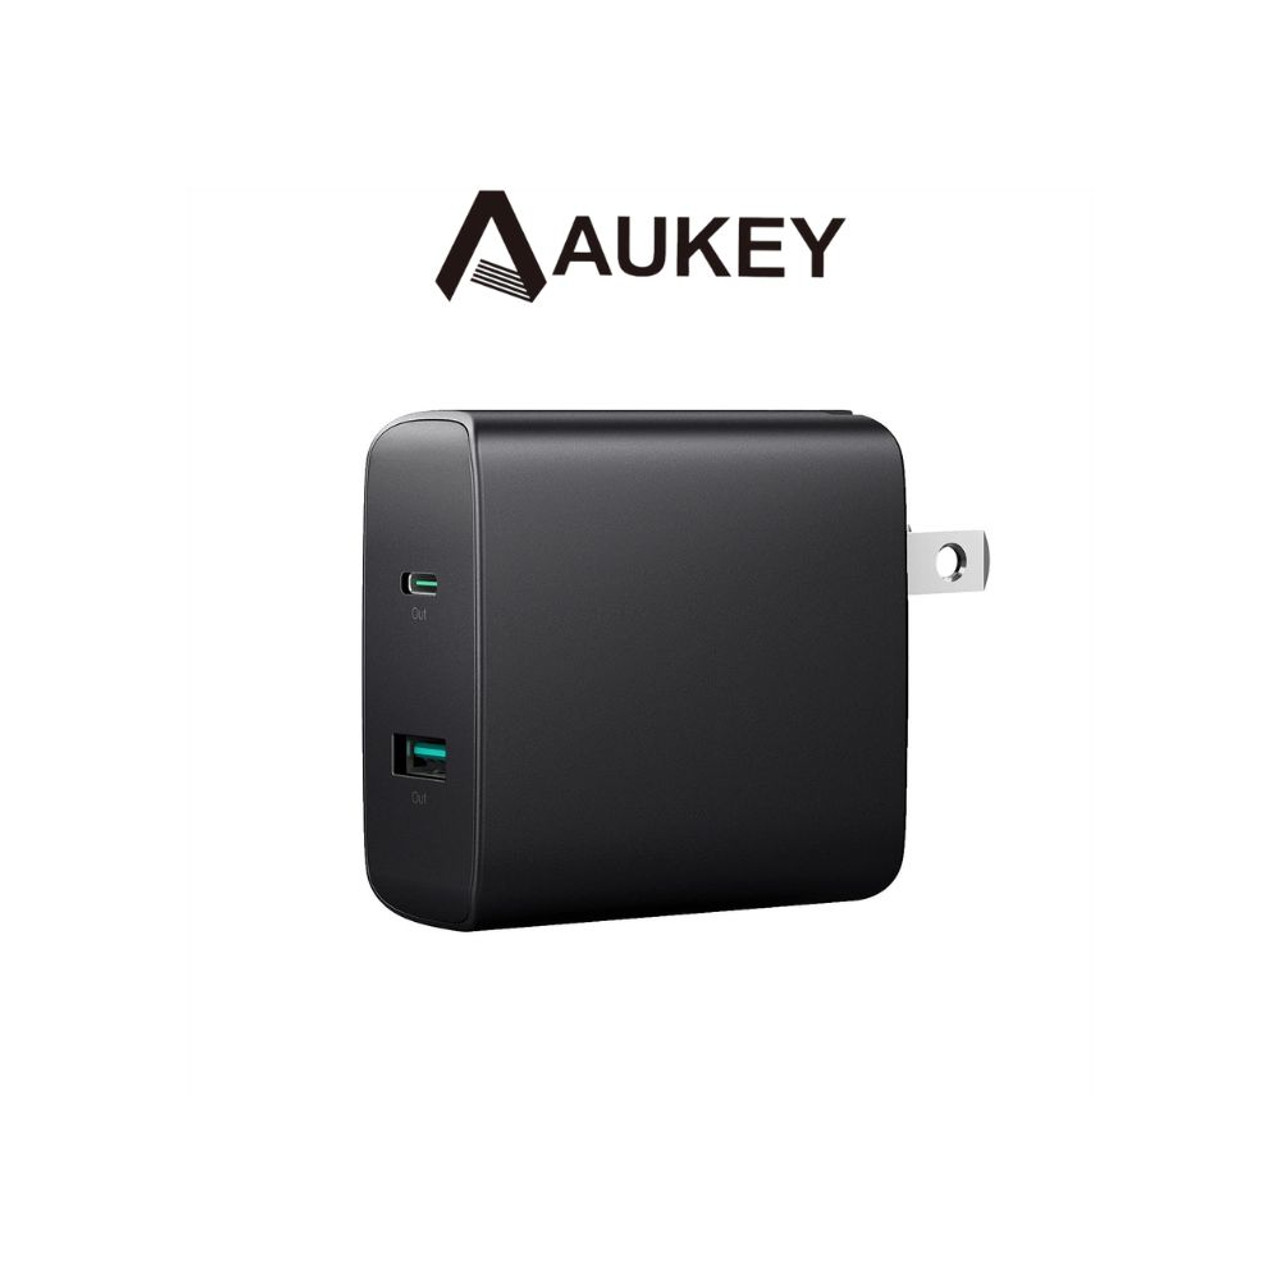 AUKEY® 56.5-Watt USB-C Wall Adapter Charger with PD3.0 product image